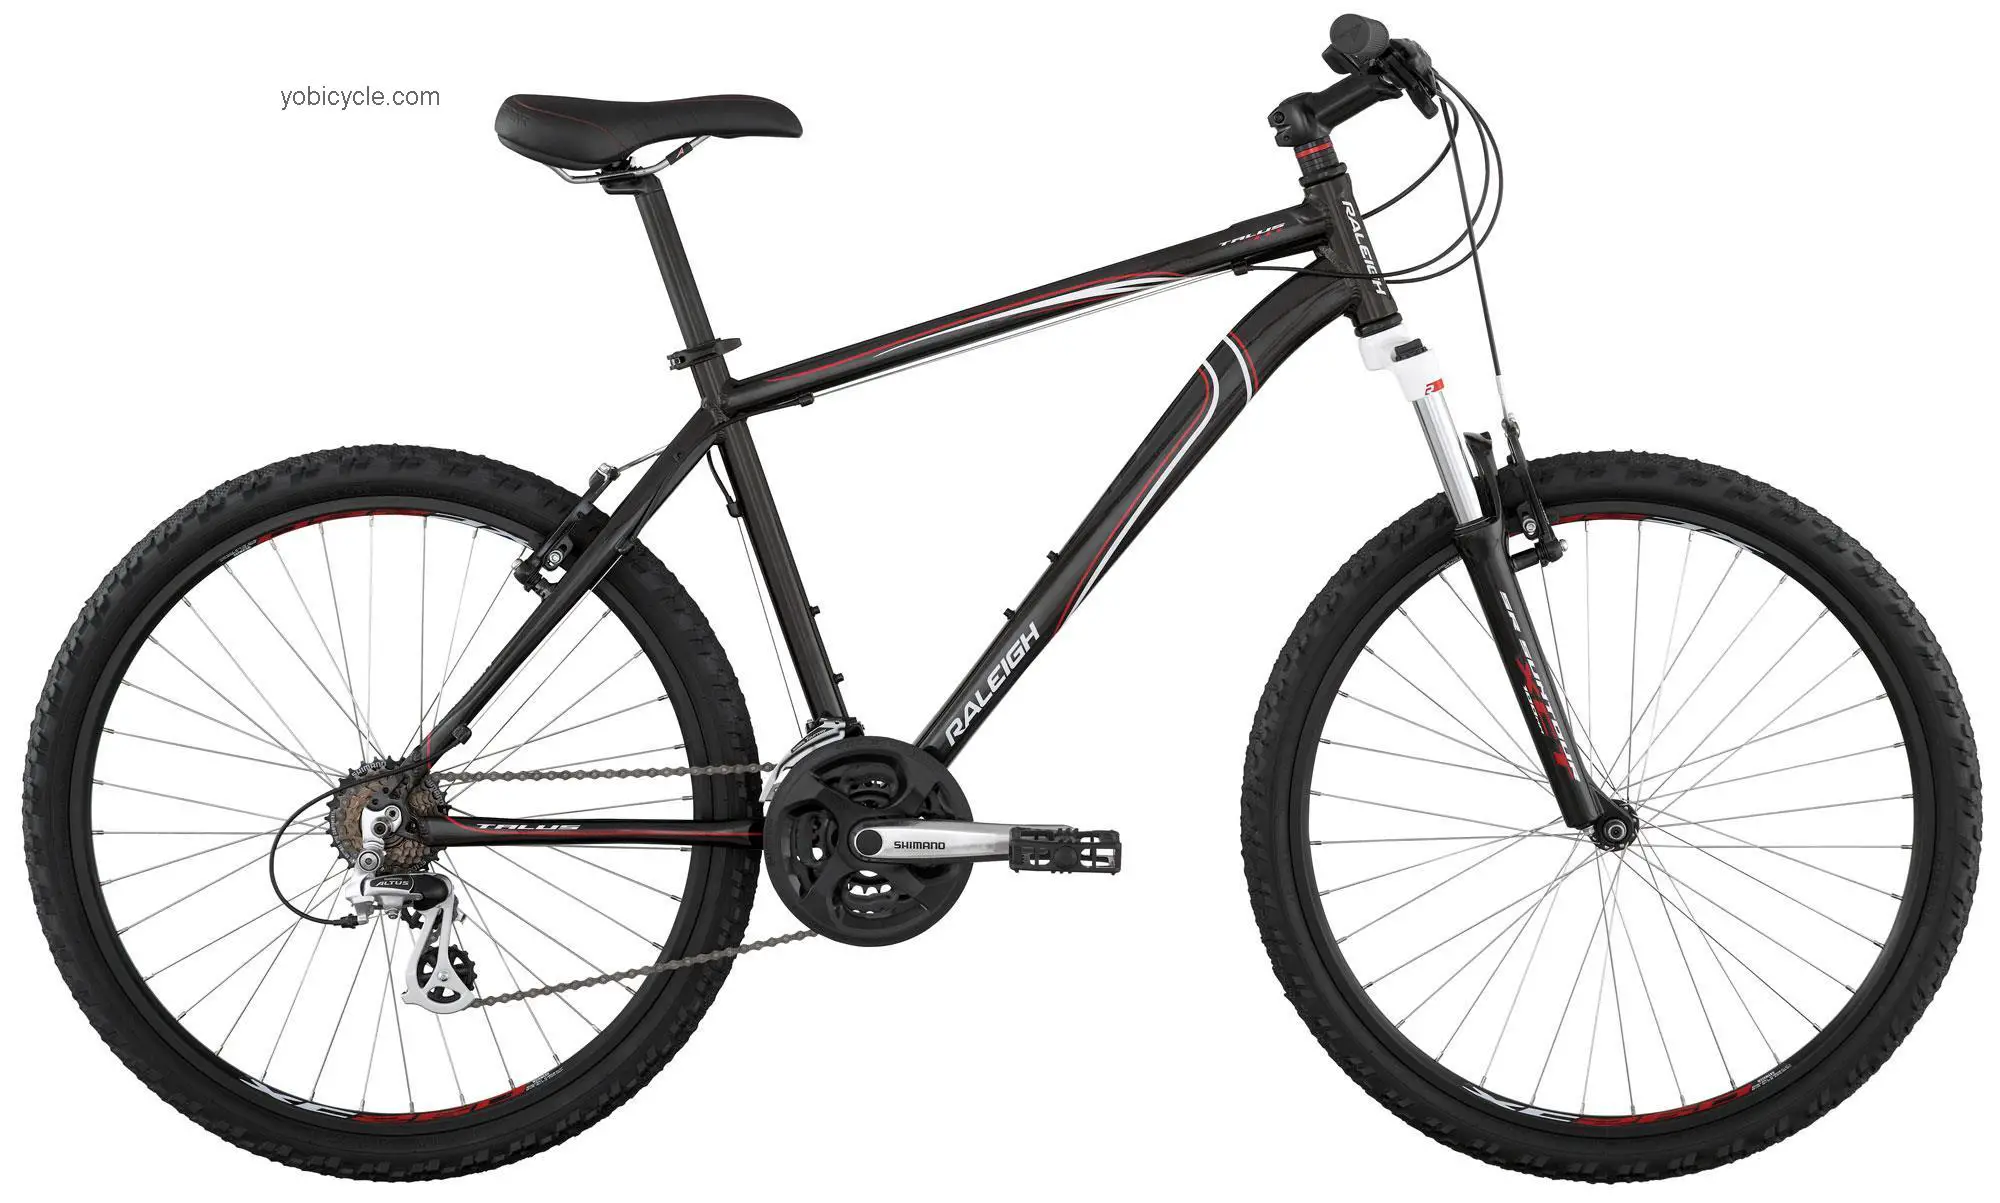 Raleigh Talus 3.0 2012 comparison online with competitors